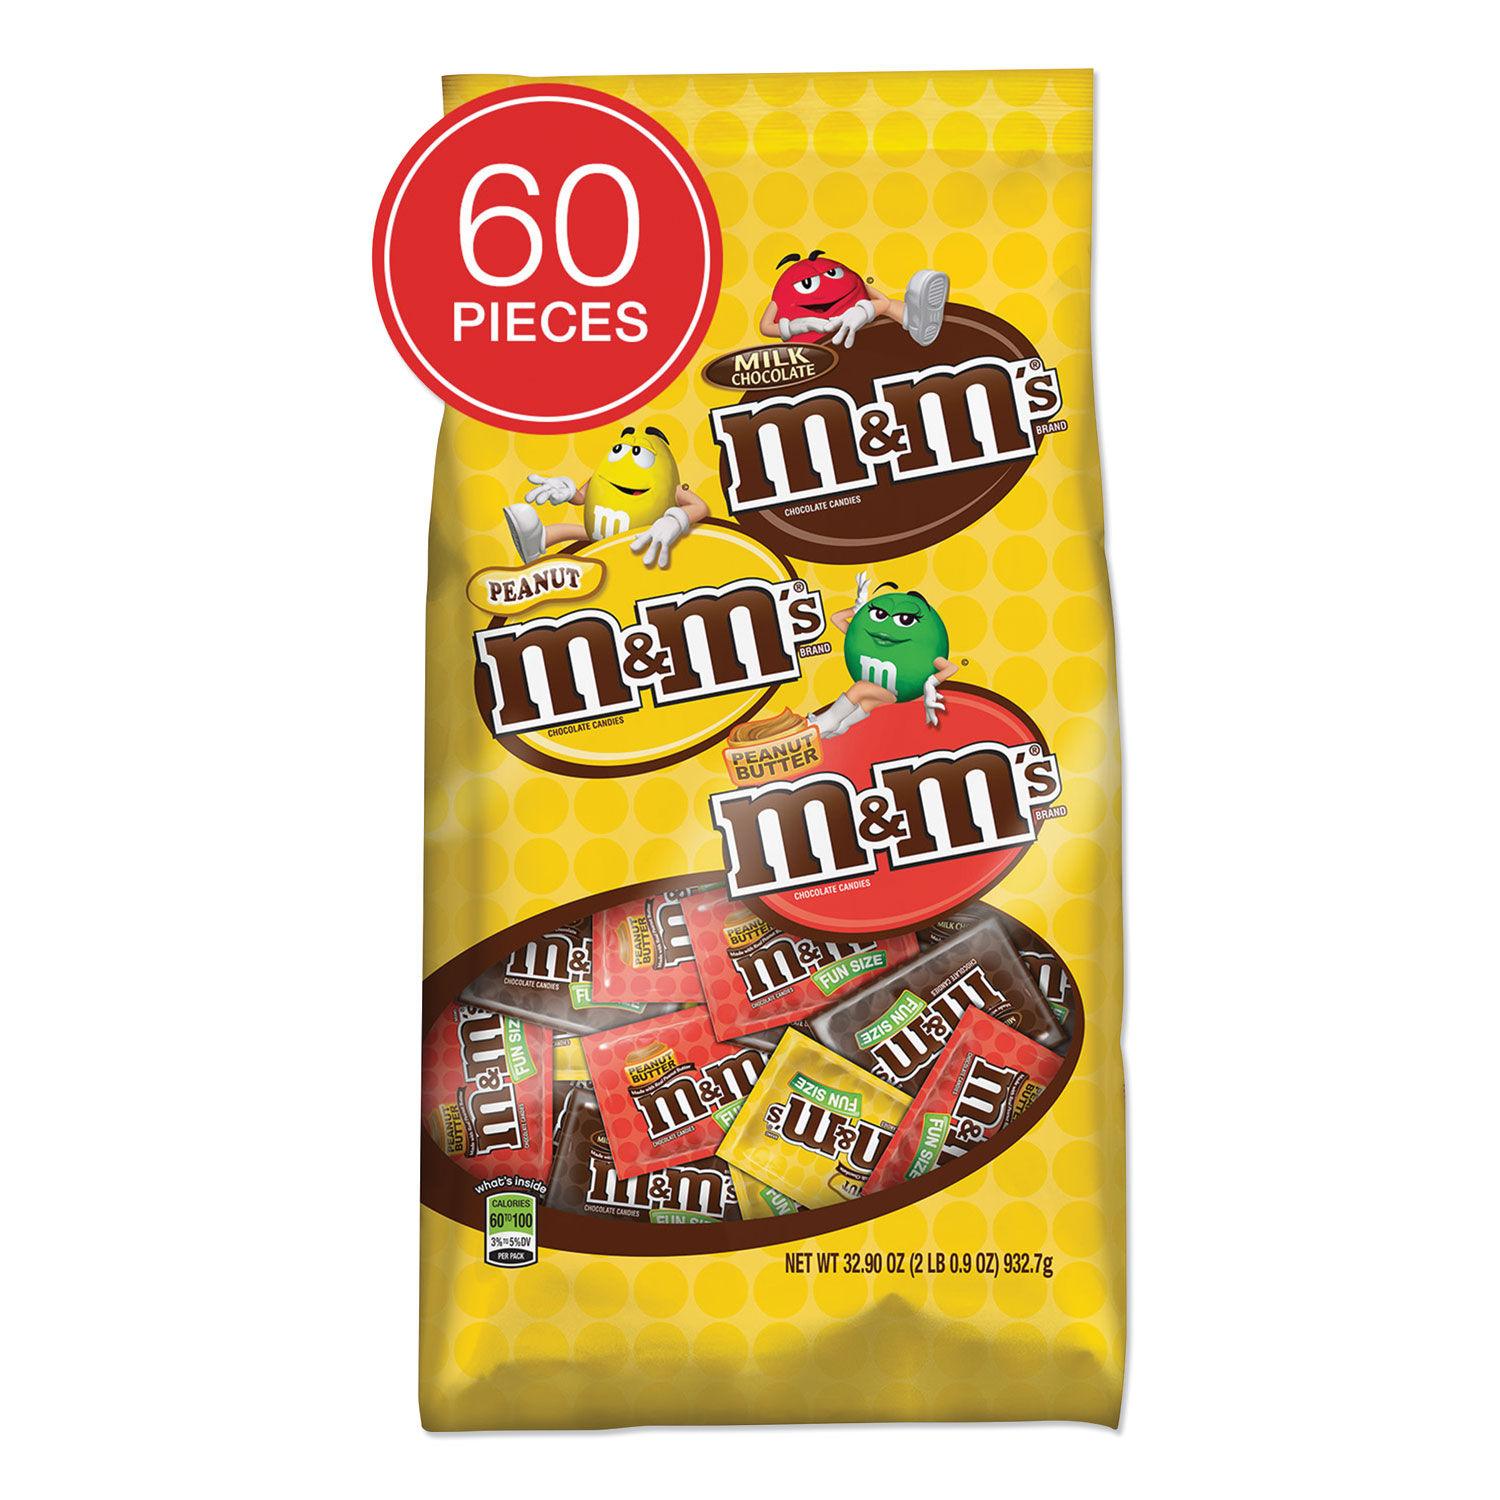 M & Ms Peanut Chocolate Candies, Packaged Candy